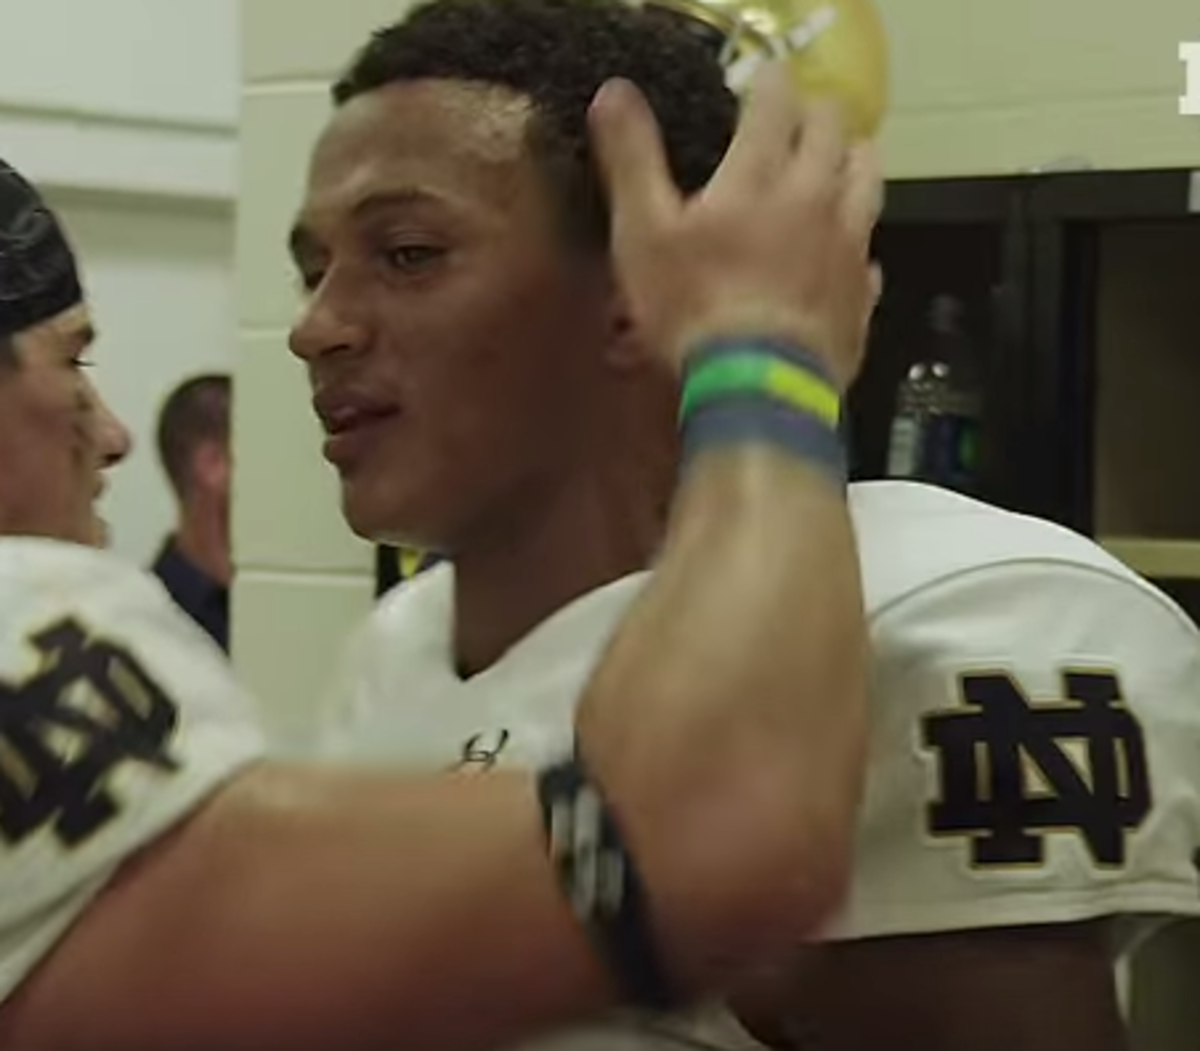 Deshone Kizer gets a pat on the head after Virginia game.